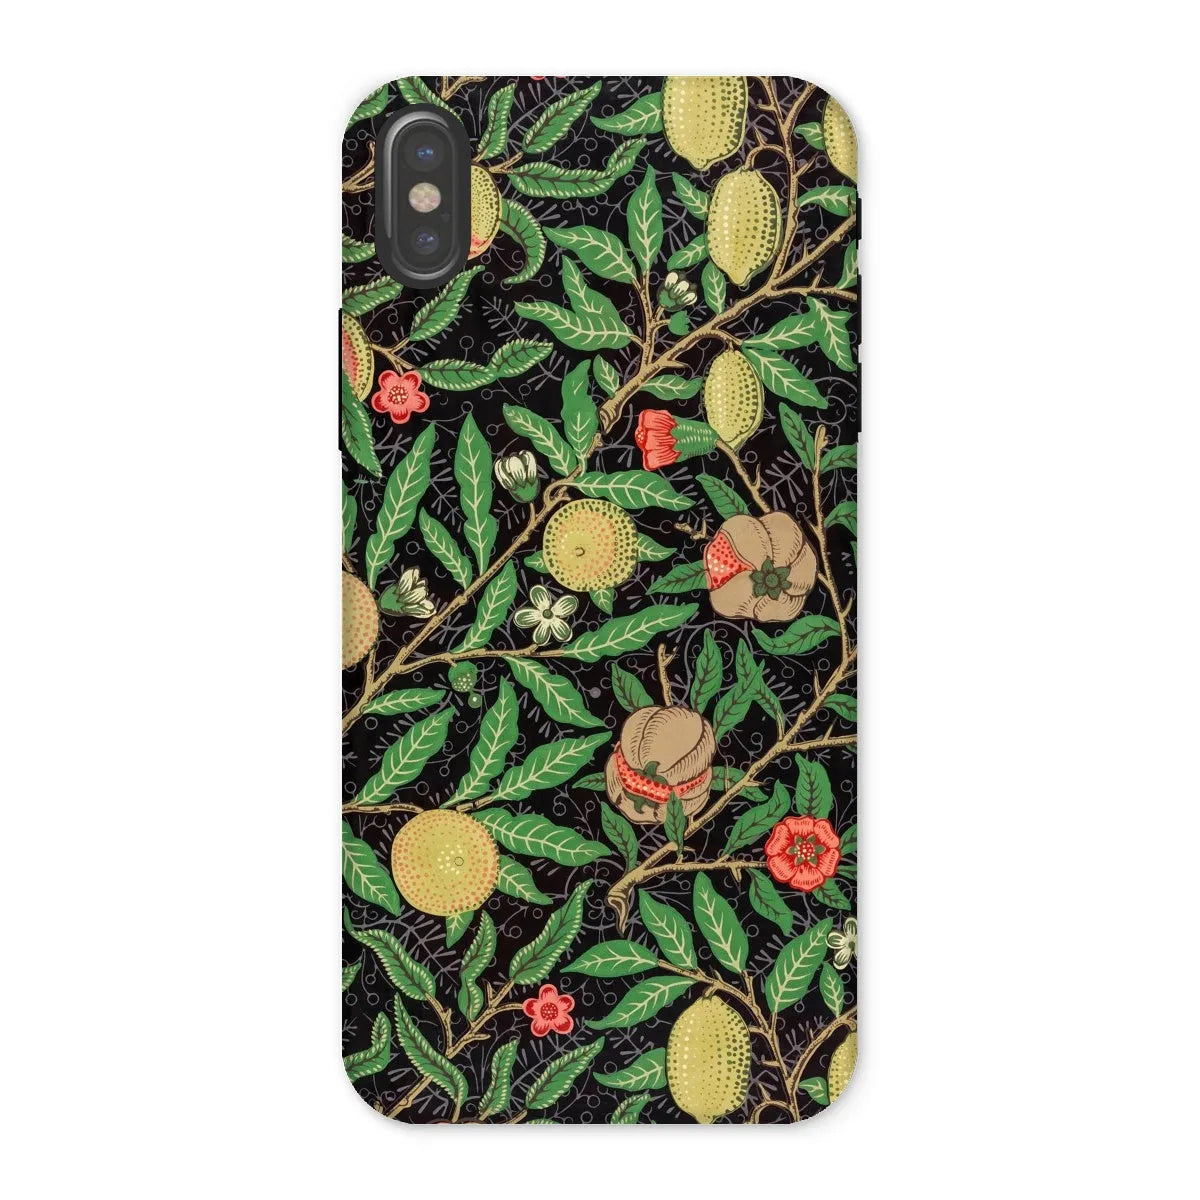 Four Fruits Too Aesthetic Pattern Phone Case - William Morris - Iphone x / Matte - Mobile Phone Cases - Aesthetic Art